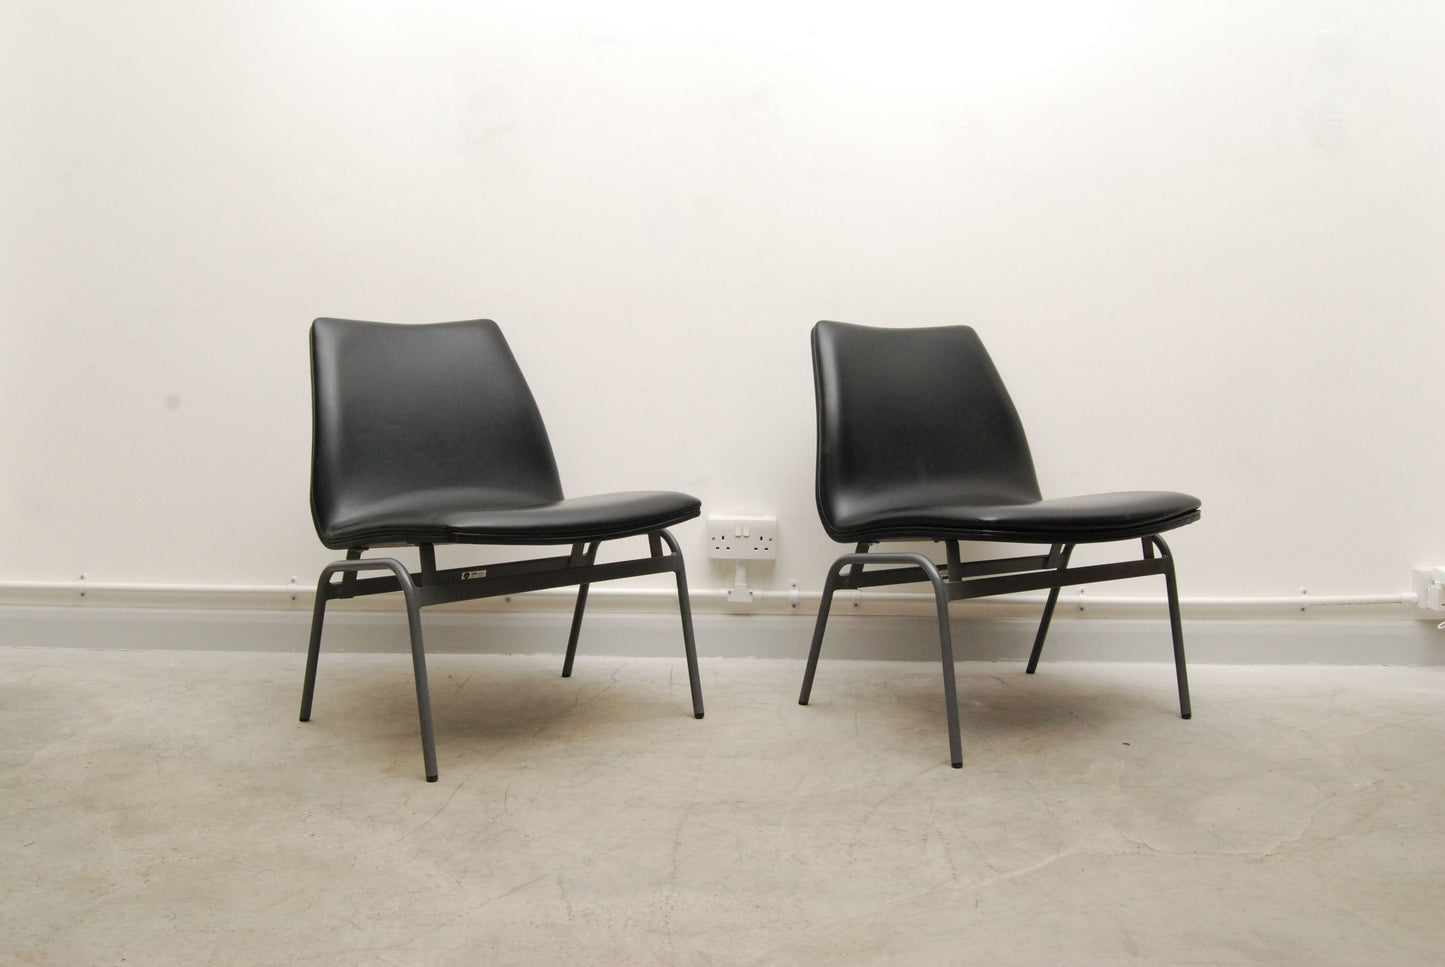 New price: Pair of occasional chairs by DUBA